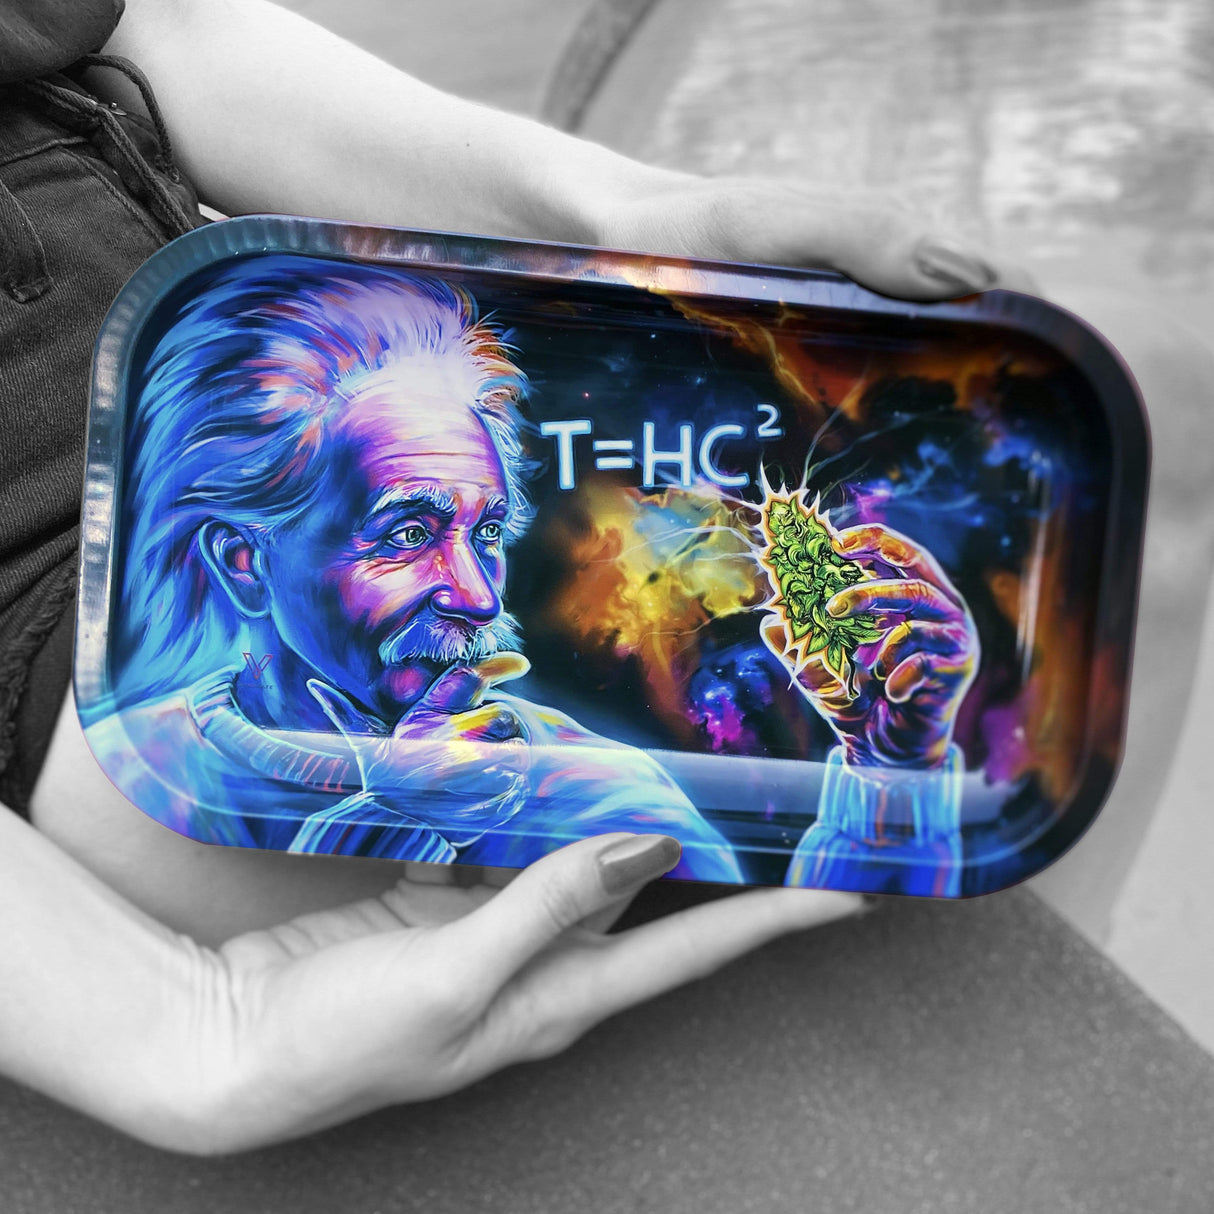 V Syndicate T=HC2 Einstein Black Hole Metal Rolling Tray in hand with cosmic design